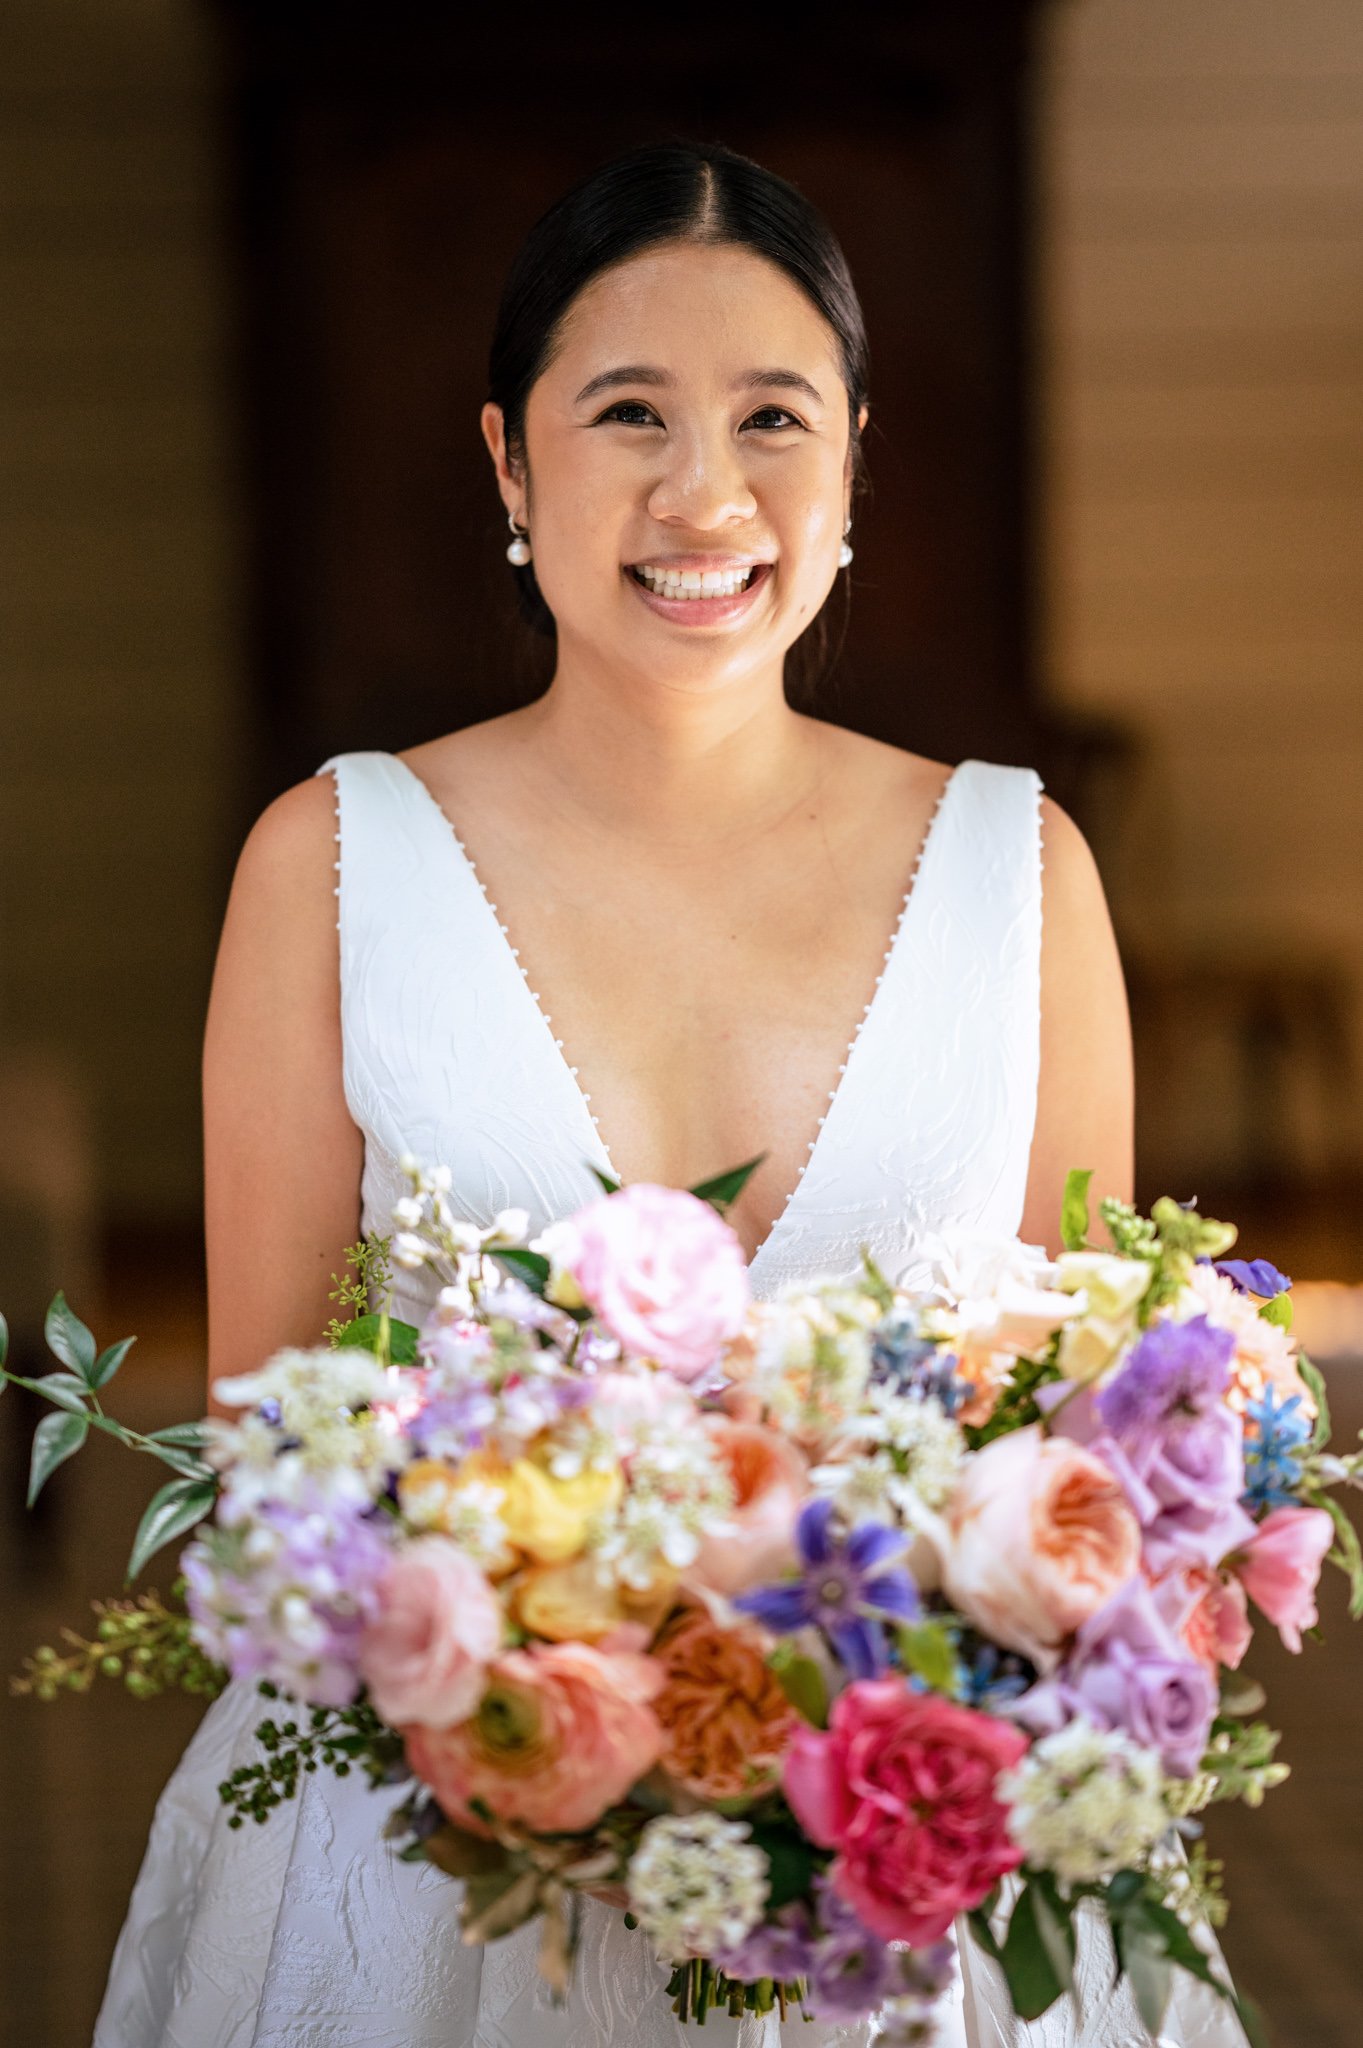 A bride in a white dress holding a colorful bouquet.